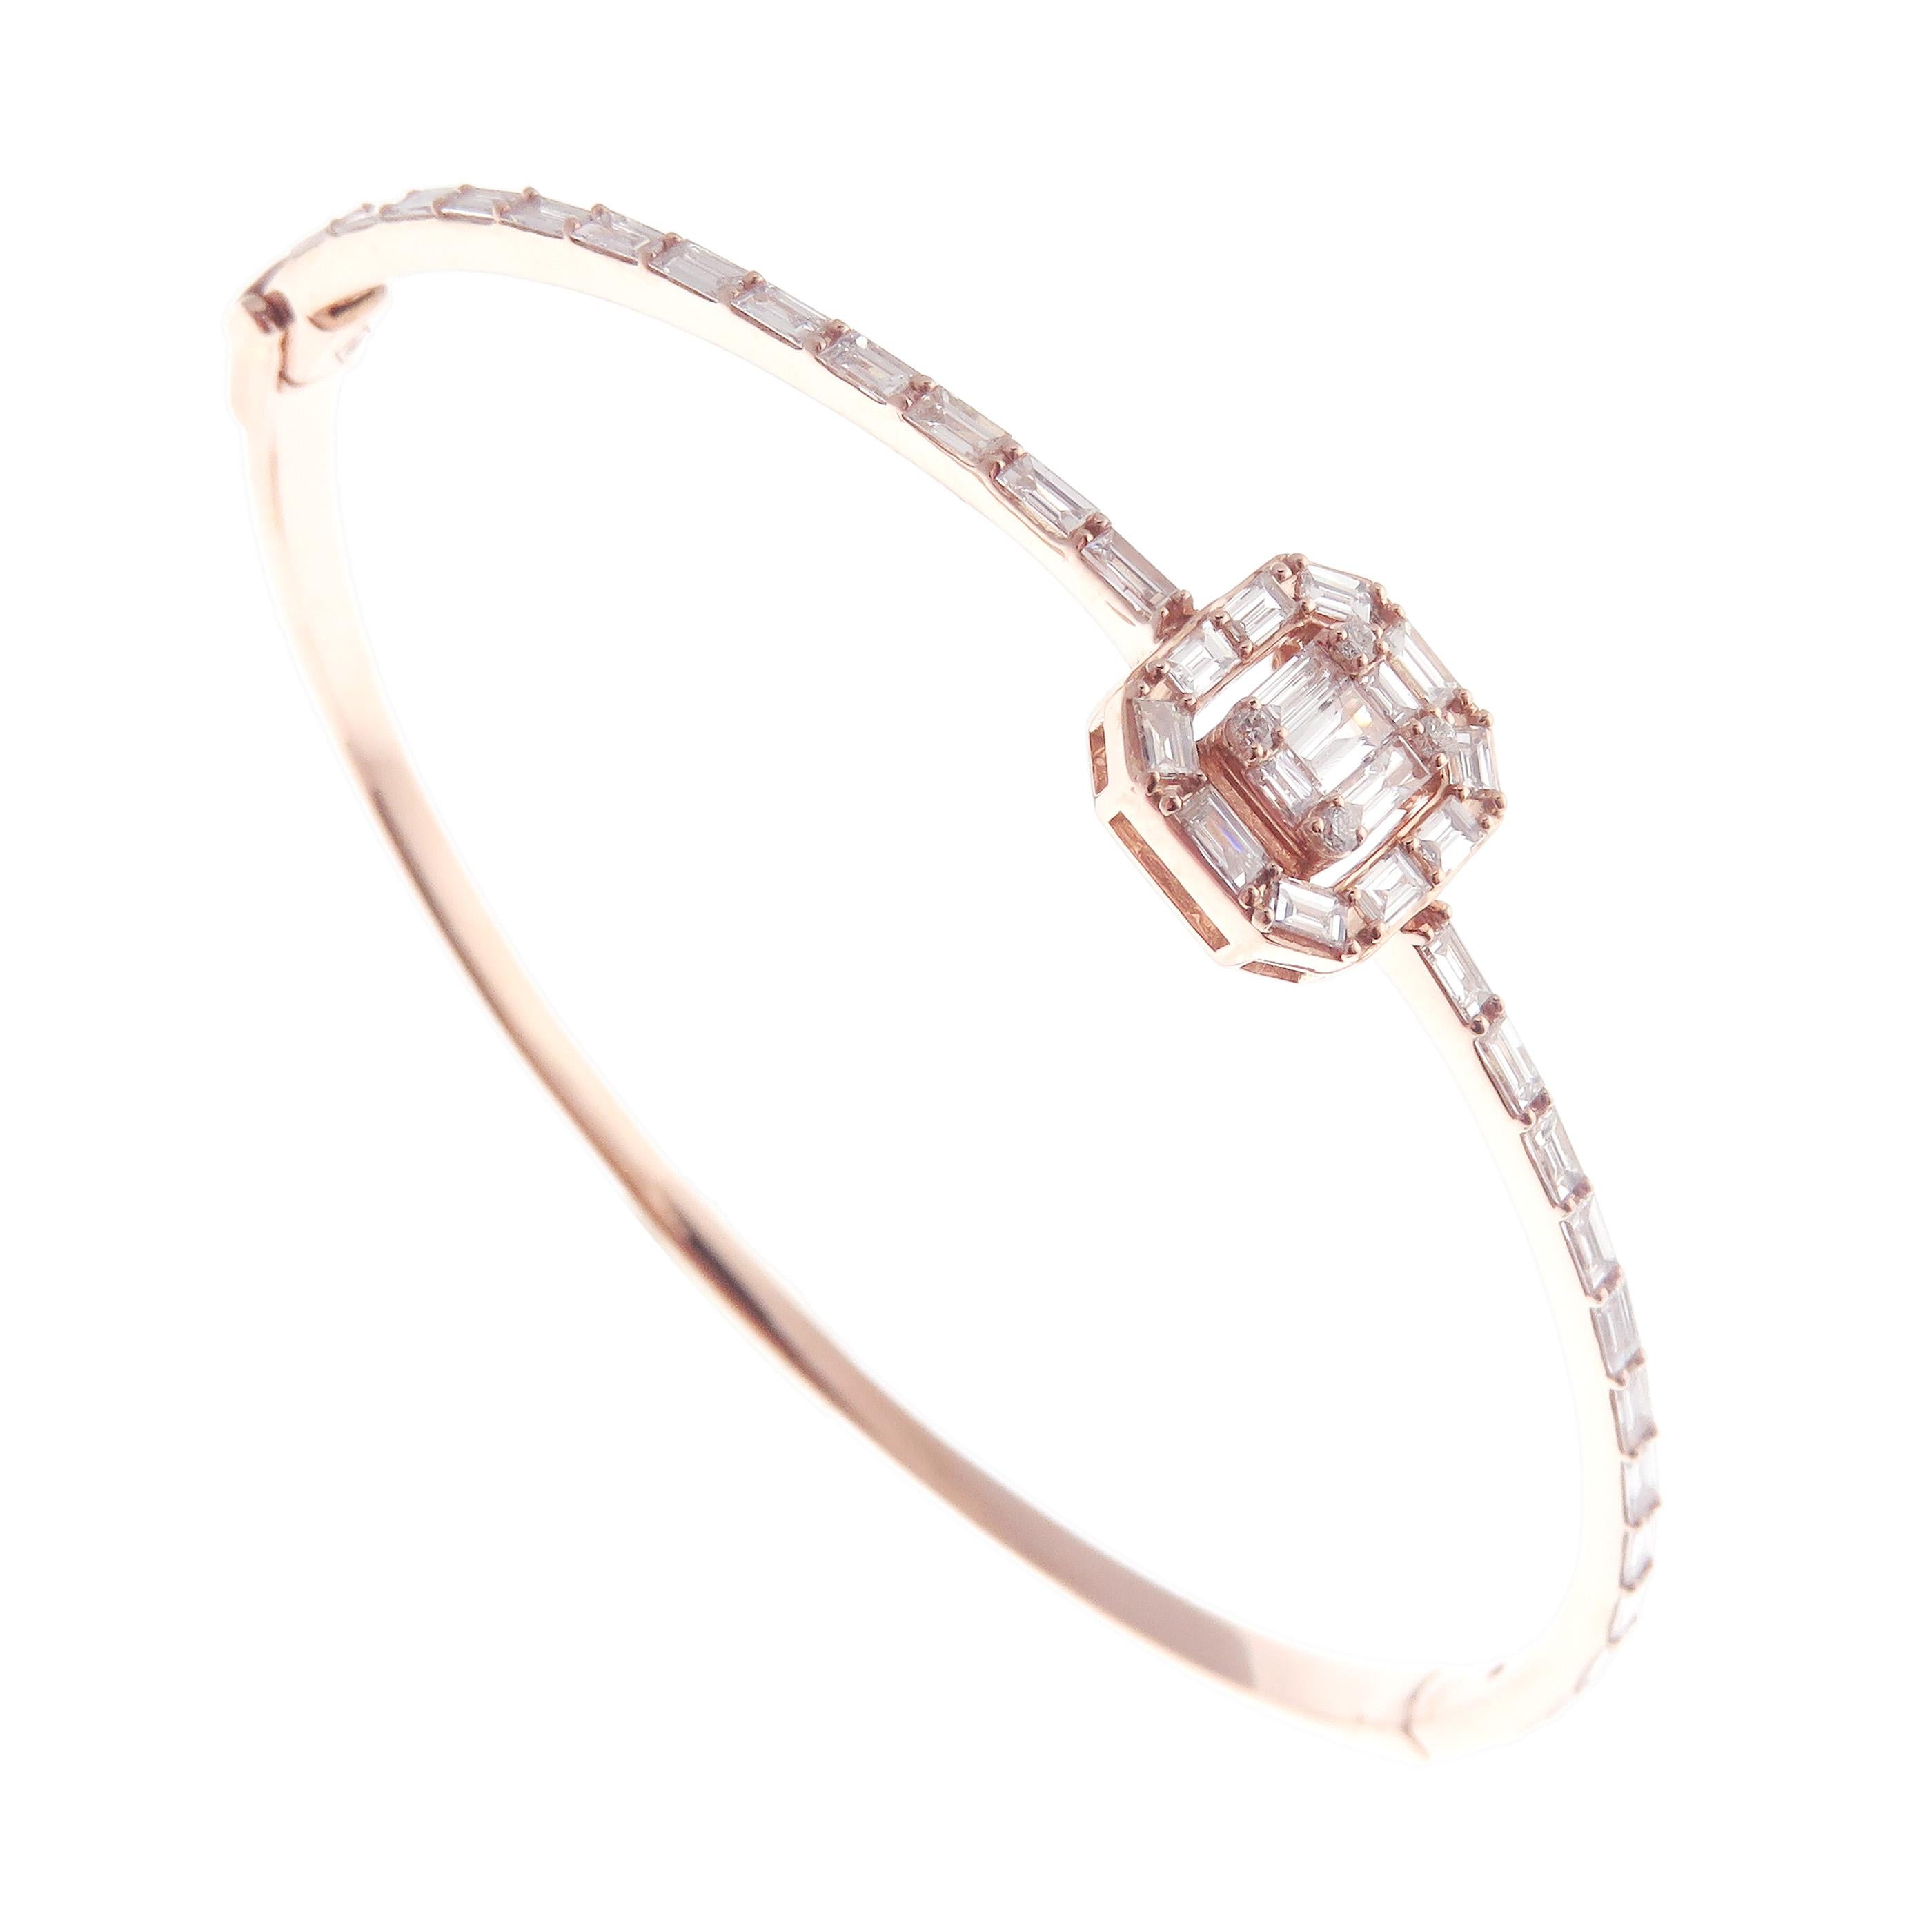 This delicate square baguette bangle is crafted in 18-karat rose gold, weighing approximately 1.35 total carats of V-Quality white diamond. Side clasp closure.  

Fits wrists up to 6.75